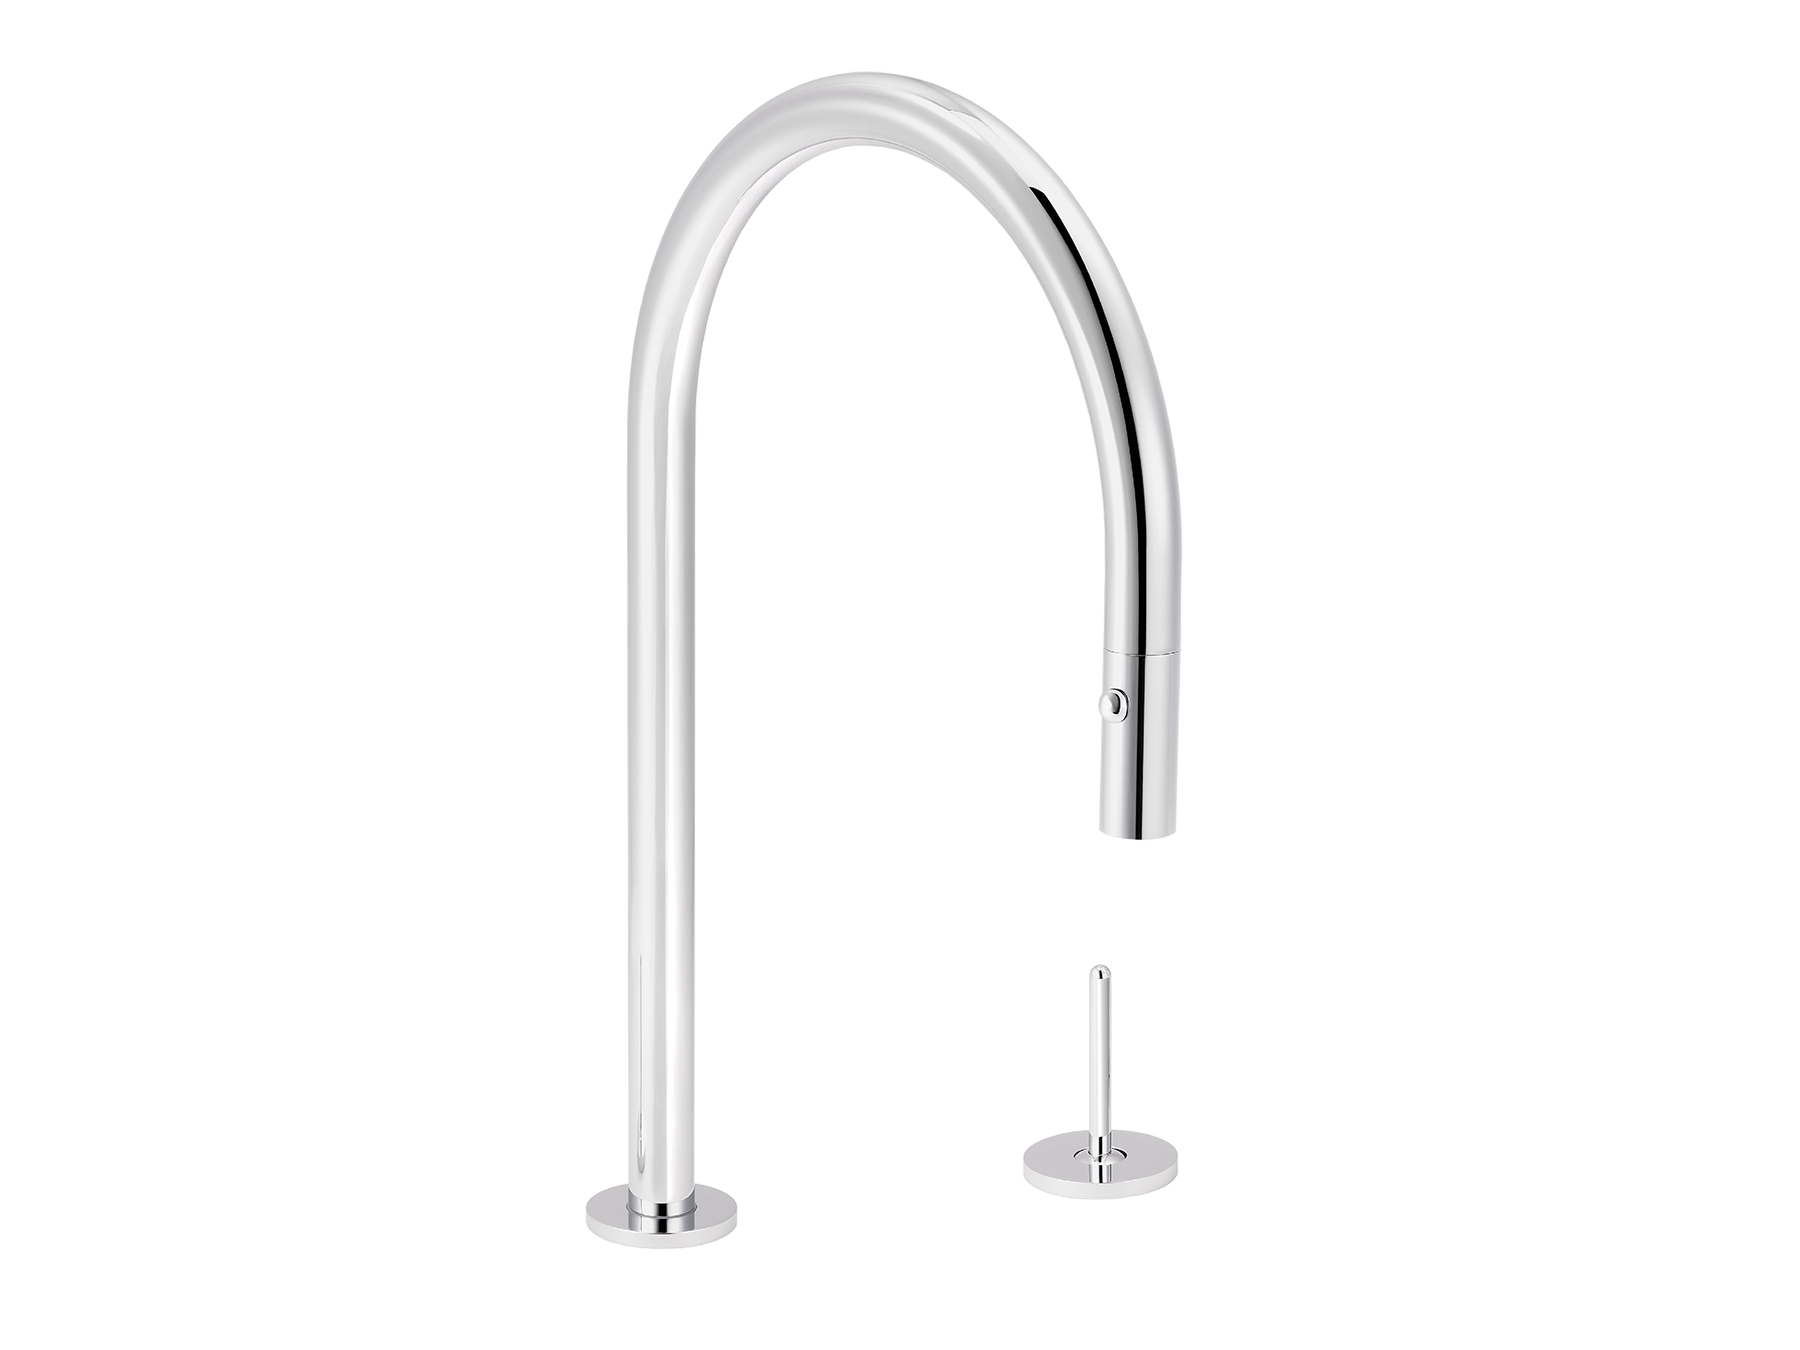 Single-lever mixer for kitchen, integrated handdou